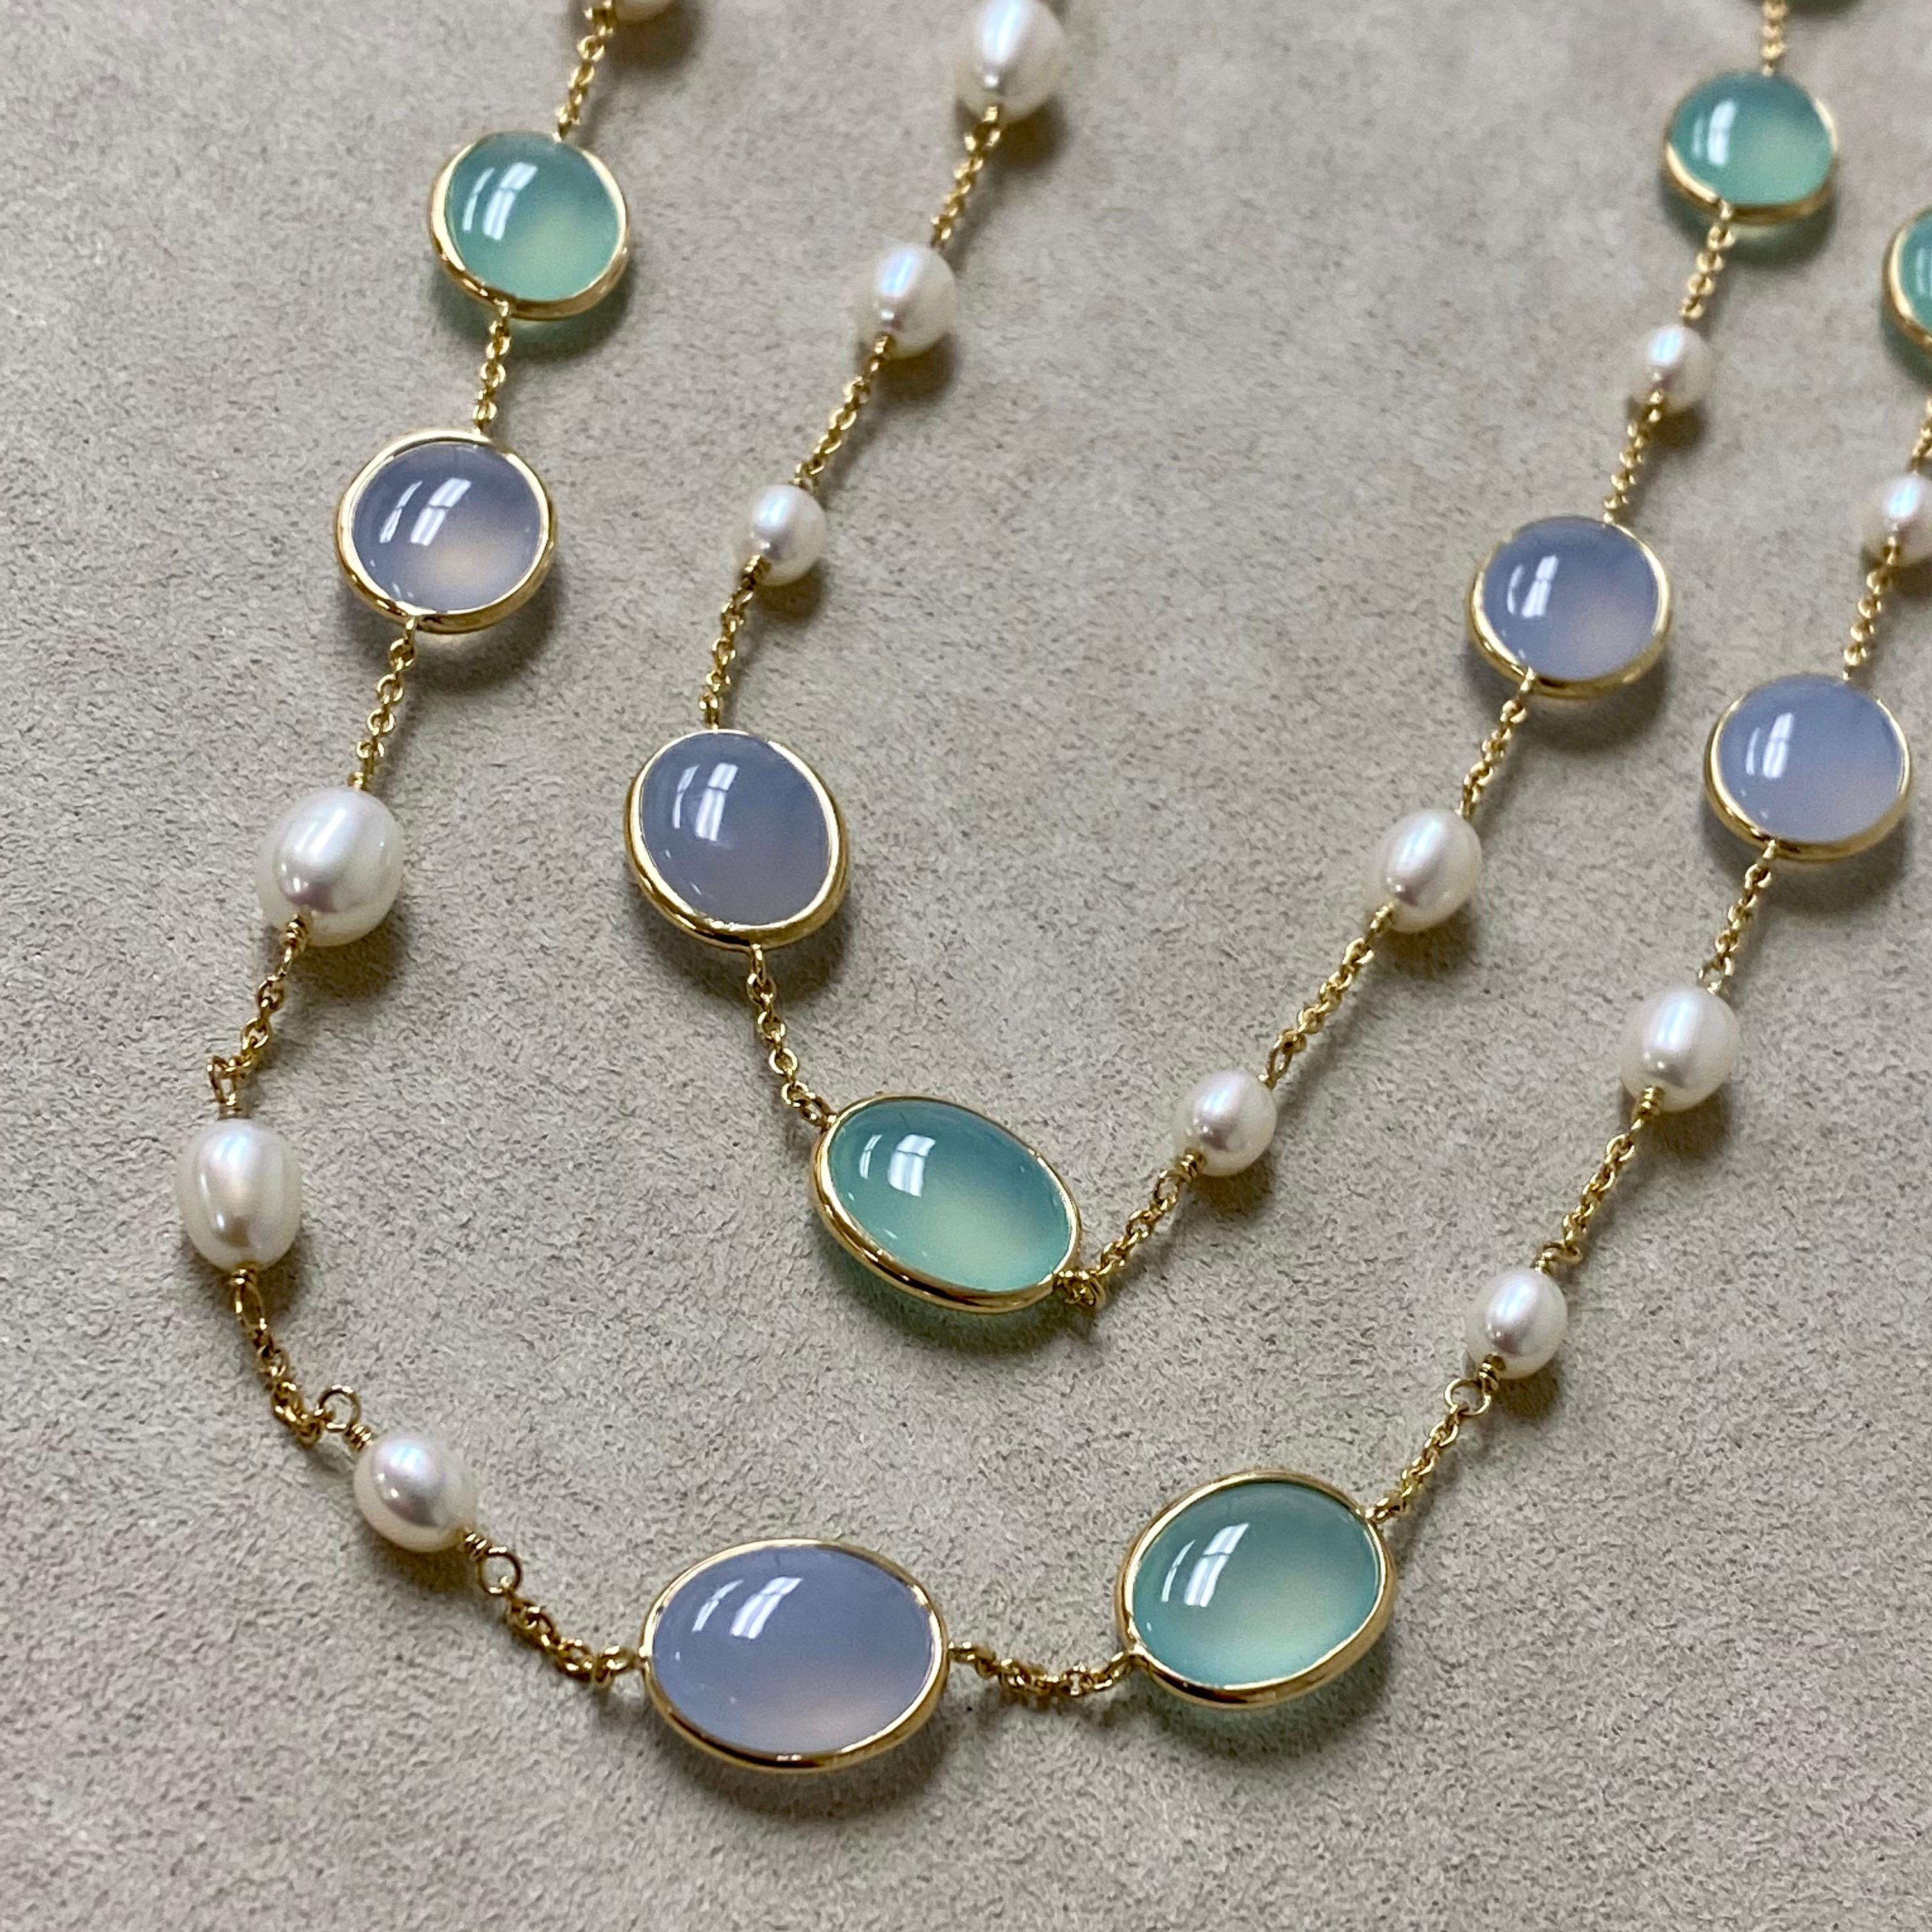 Contemporary Syna Yellow Gold Necklace with Pearls, Blue Chalcedony and Sea Green Chalcedony